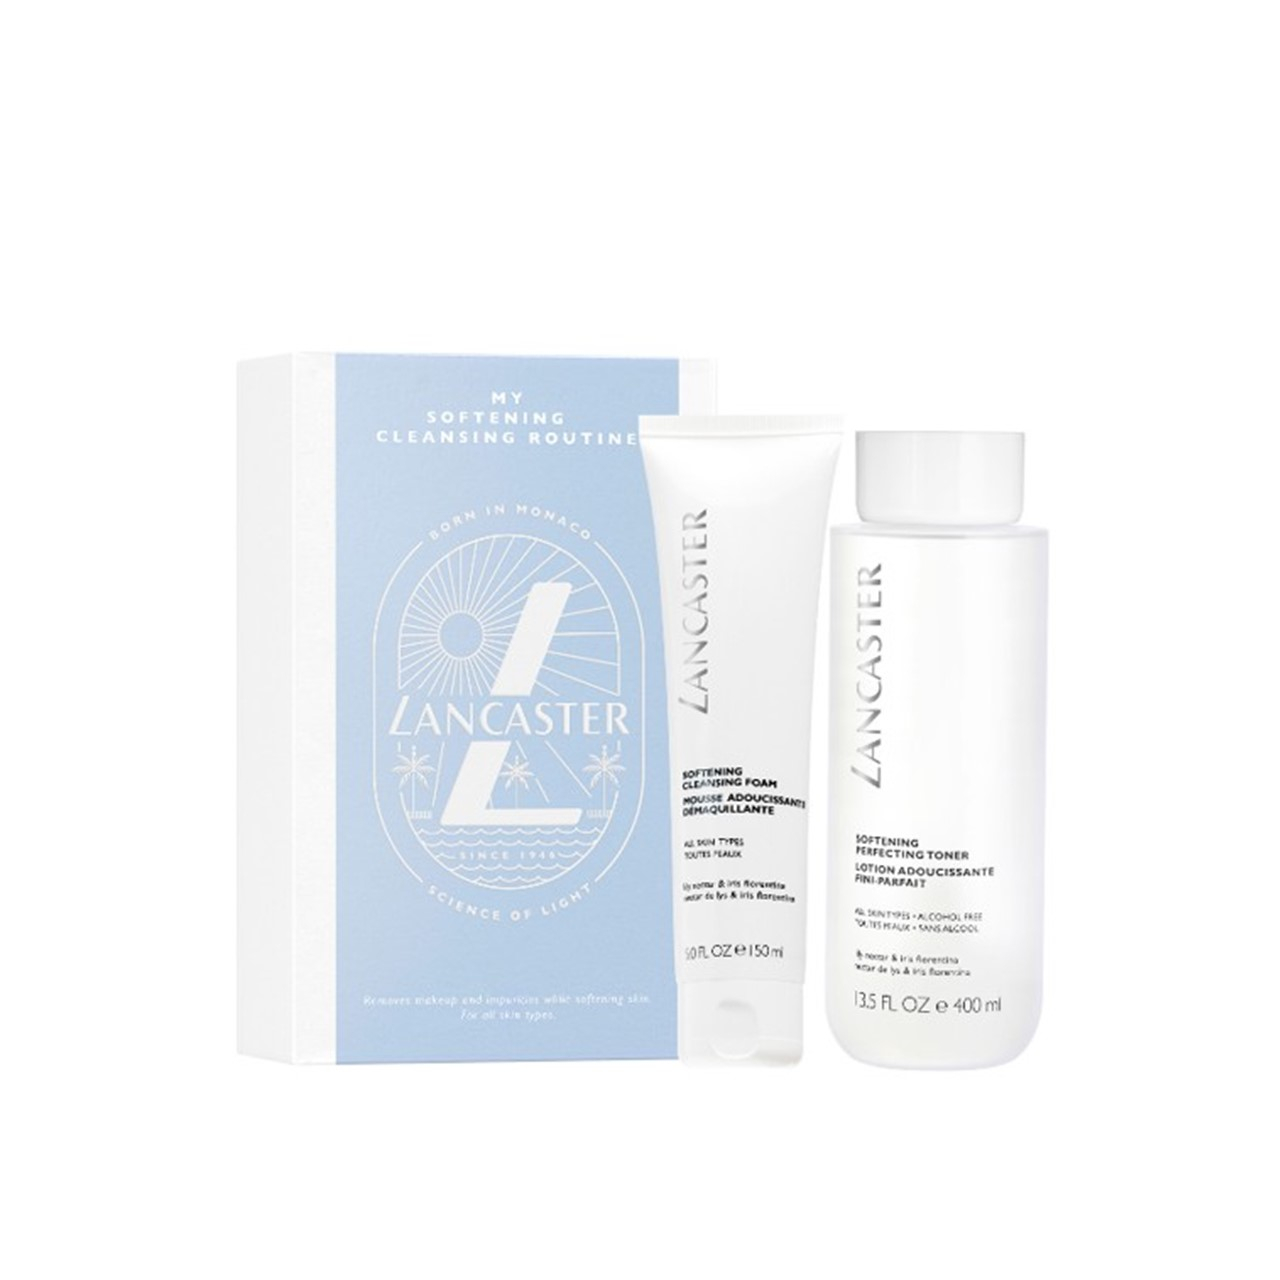 Lancaster My Softening Cleansing Routine Coffret